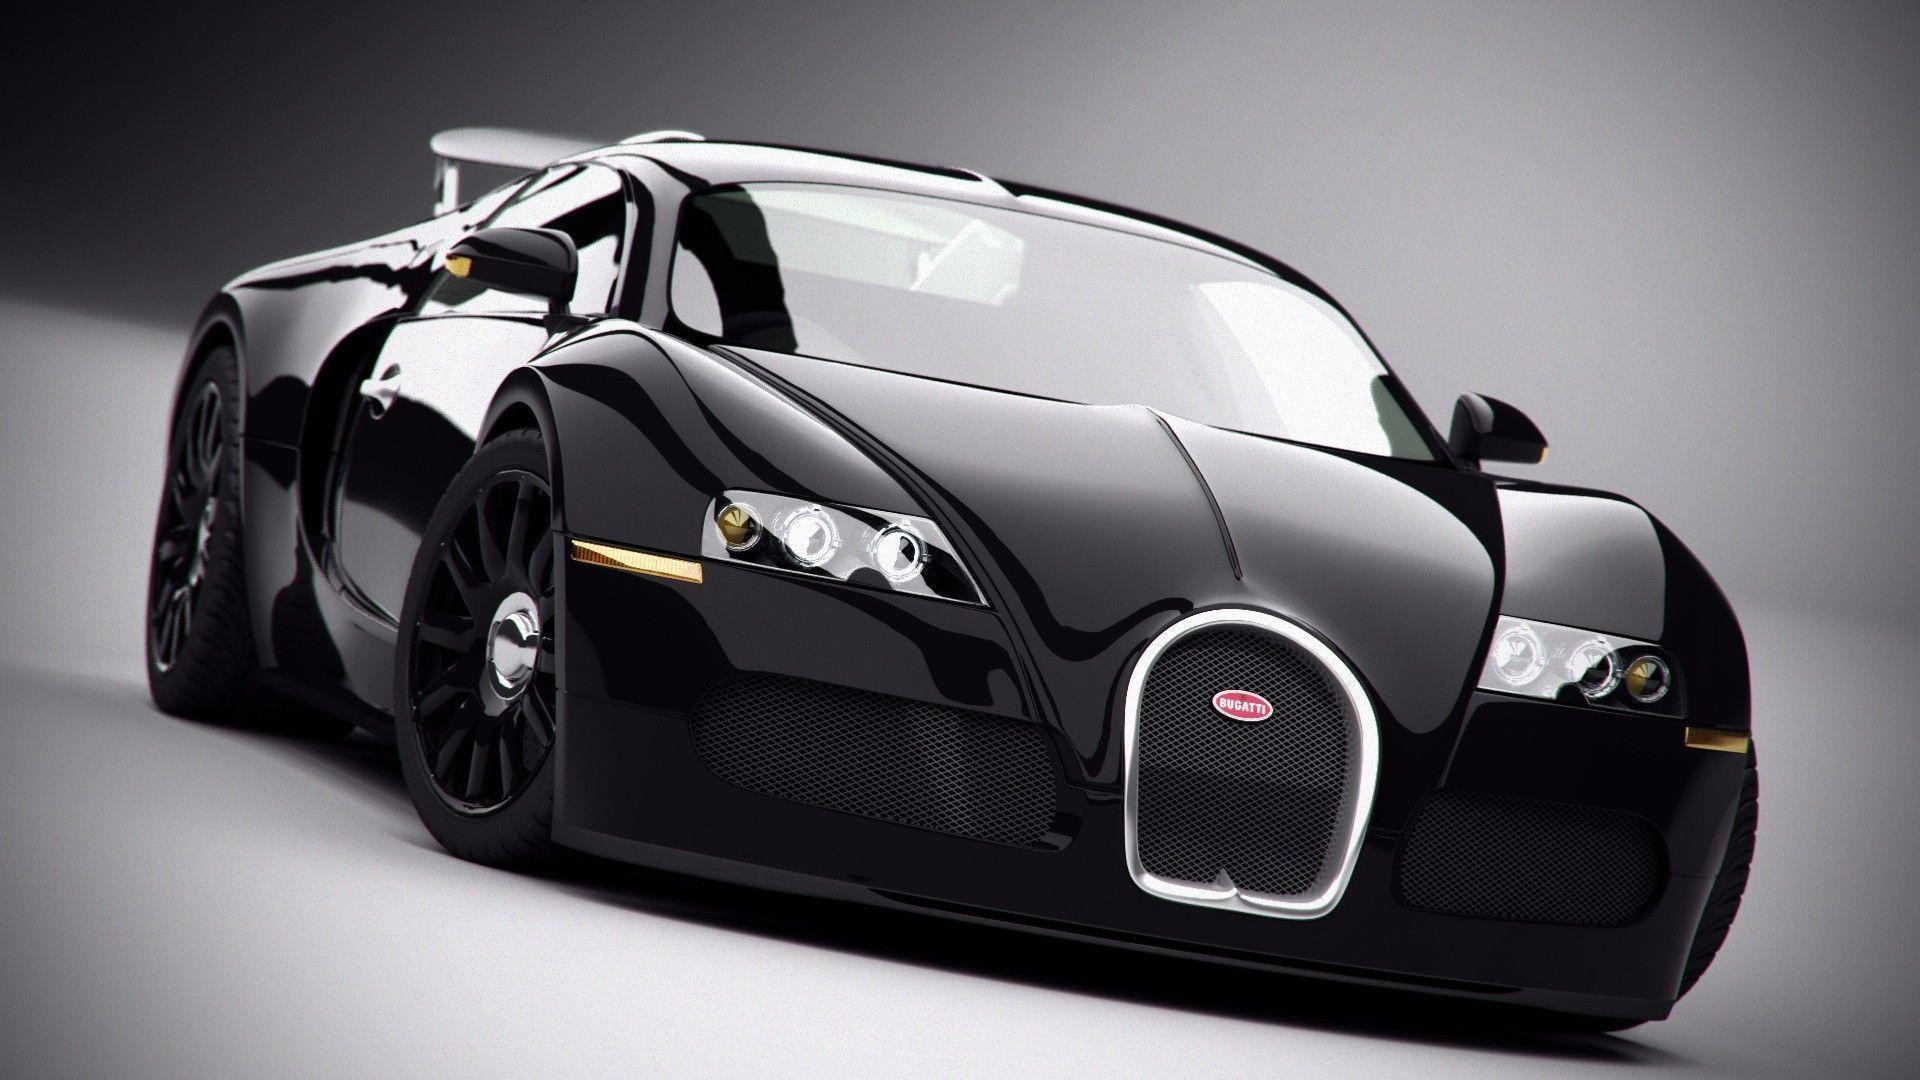 Nothing found for Bugatti Veyron On A Black Background Wallpaper